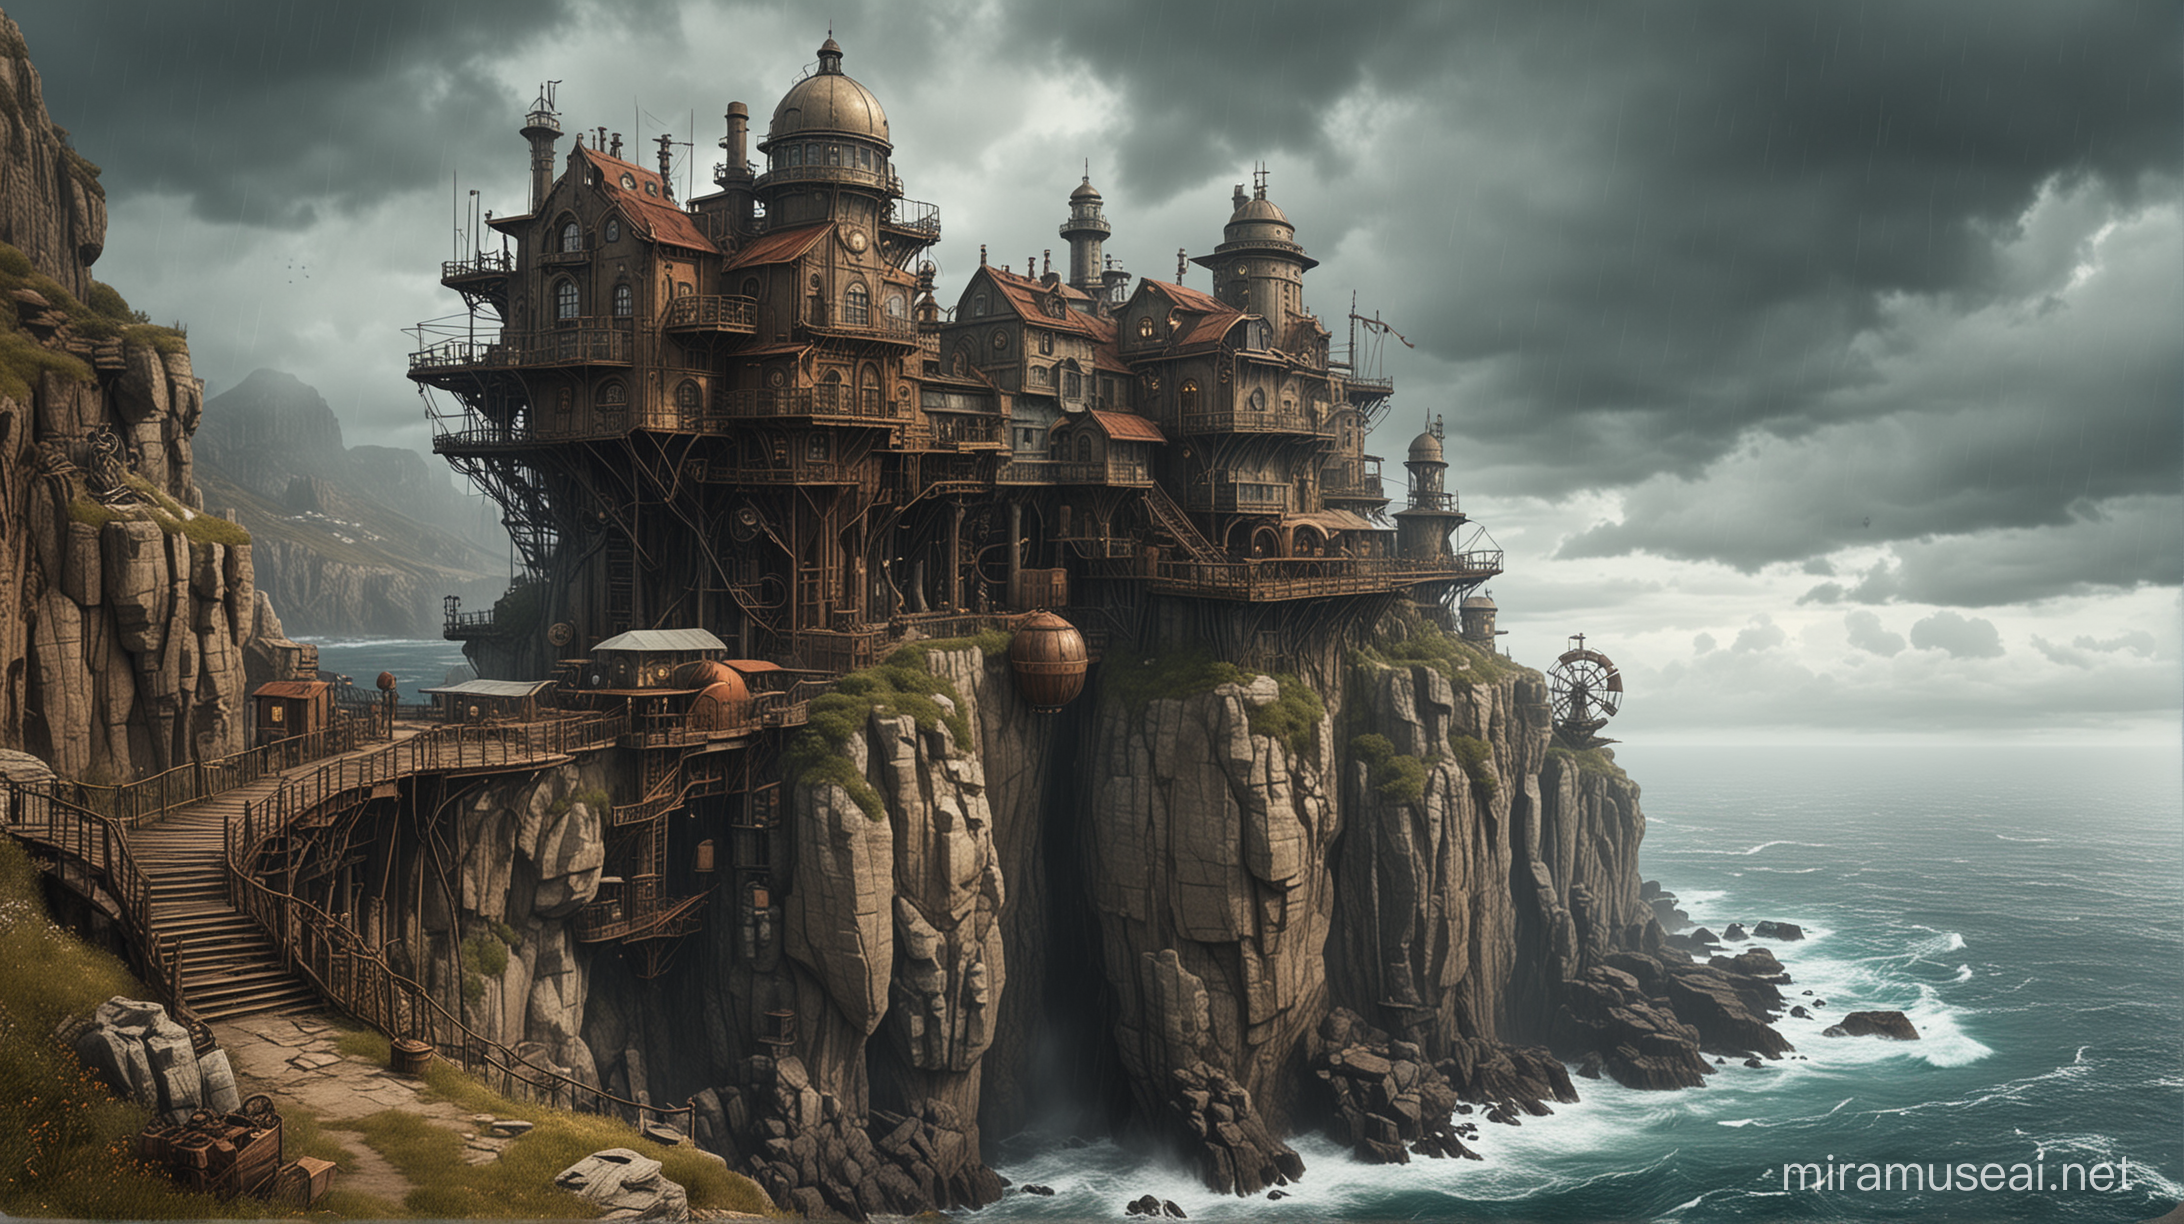 Steampunk colony on the high cliff by the sea. Cloudy and rainy. The sea is troubled.